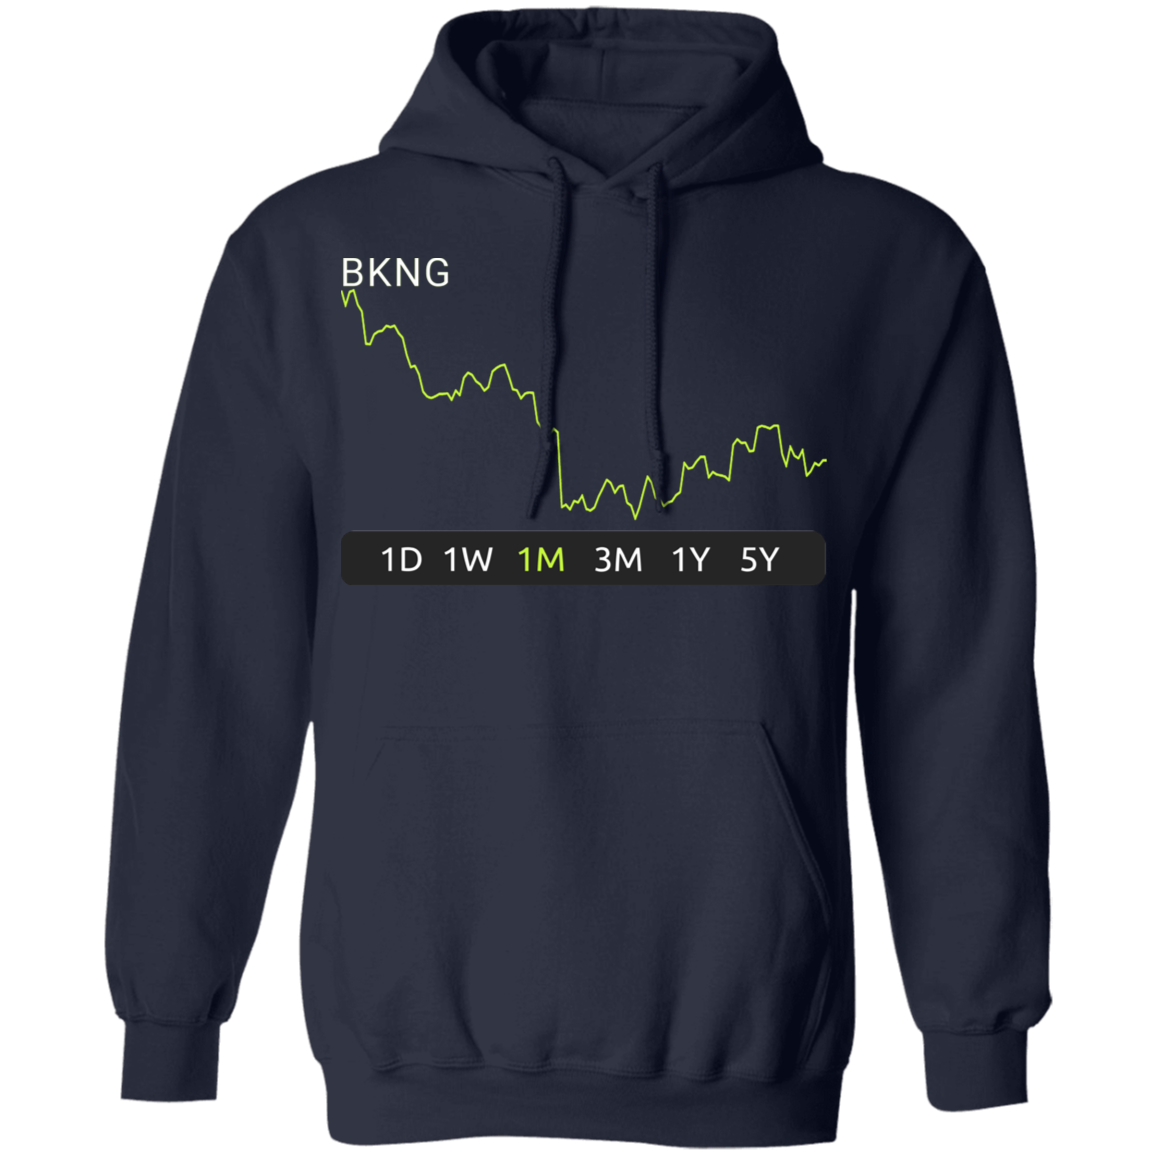 BKNG Stock  1m  Pullover Hoodie